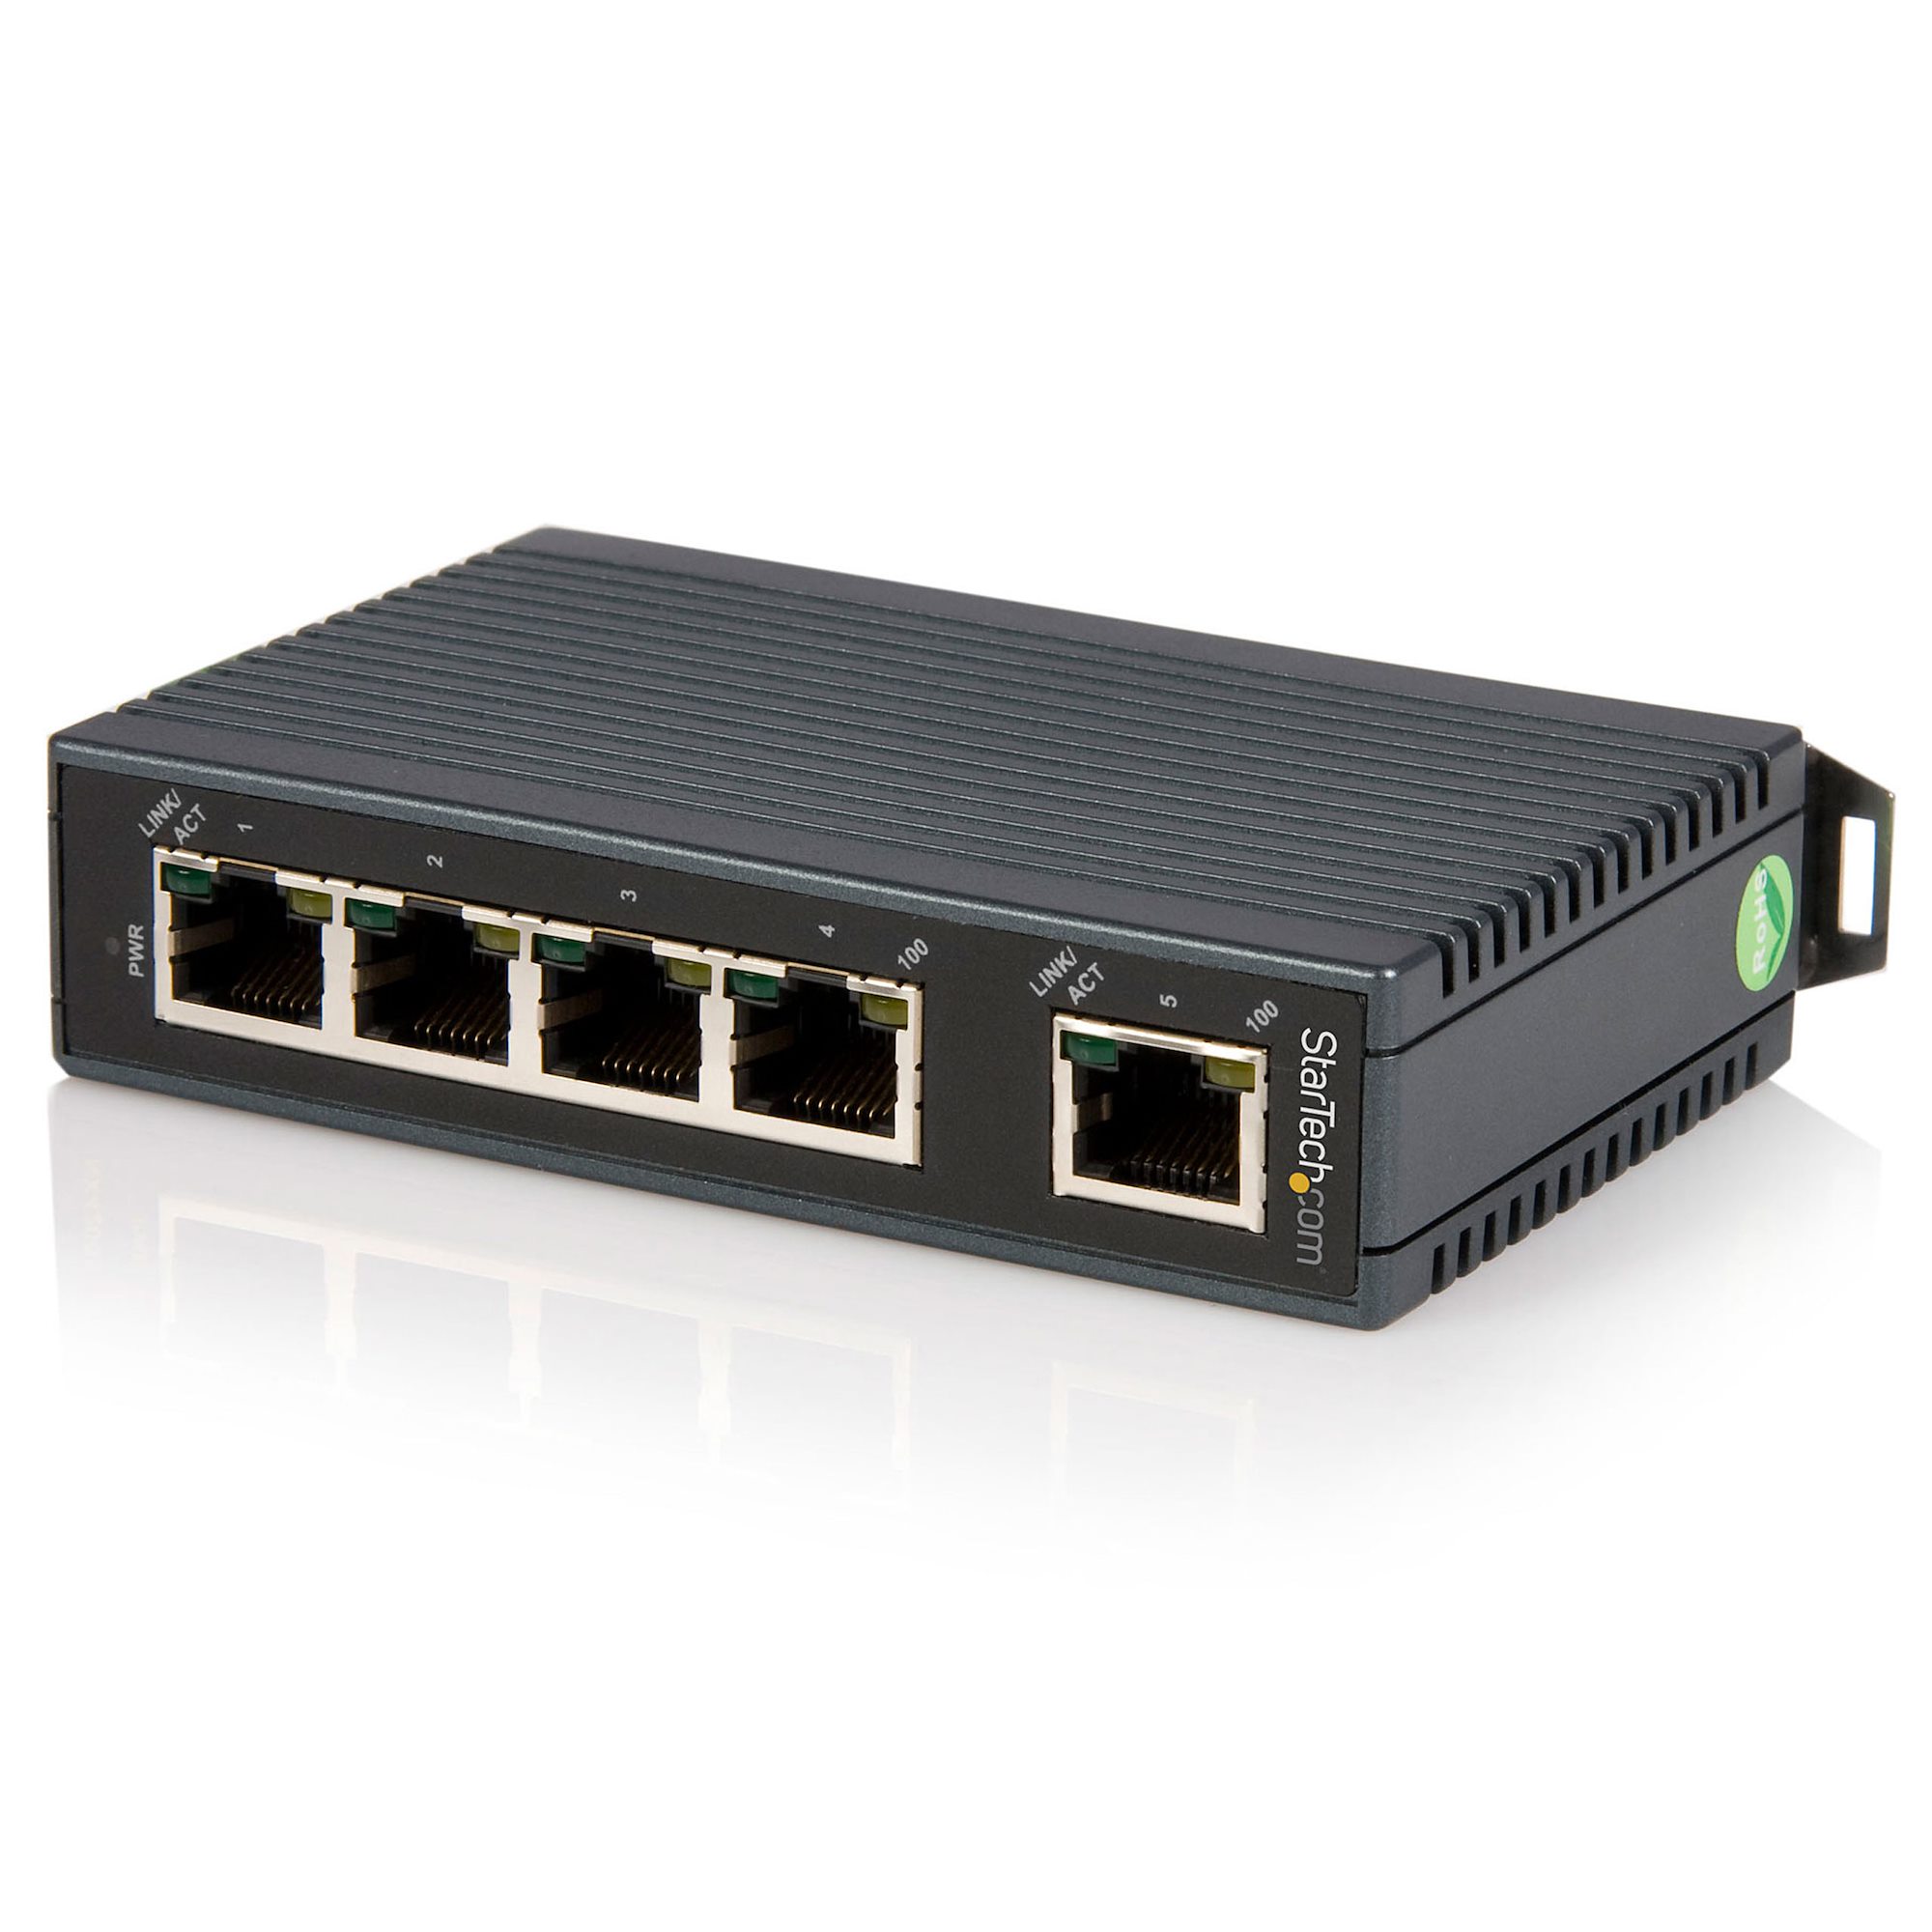 Industrial Ethernet switches